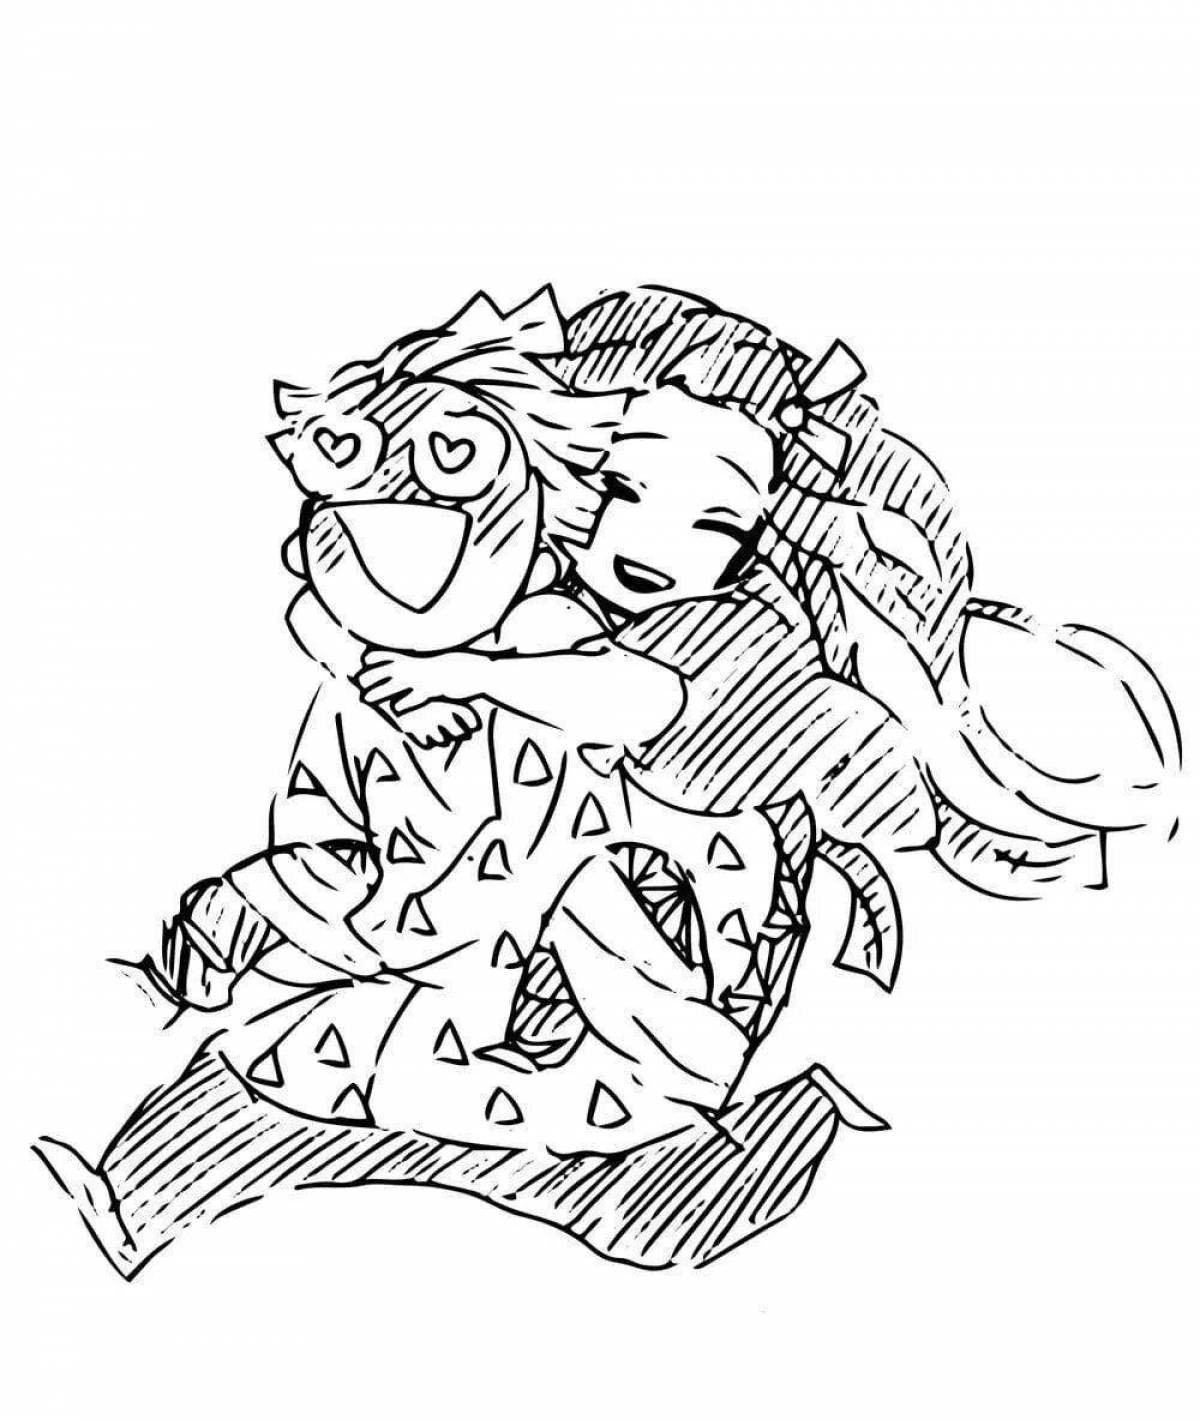 Fancy coloring pages of nezuko and zenitsu